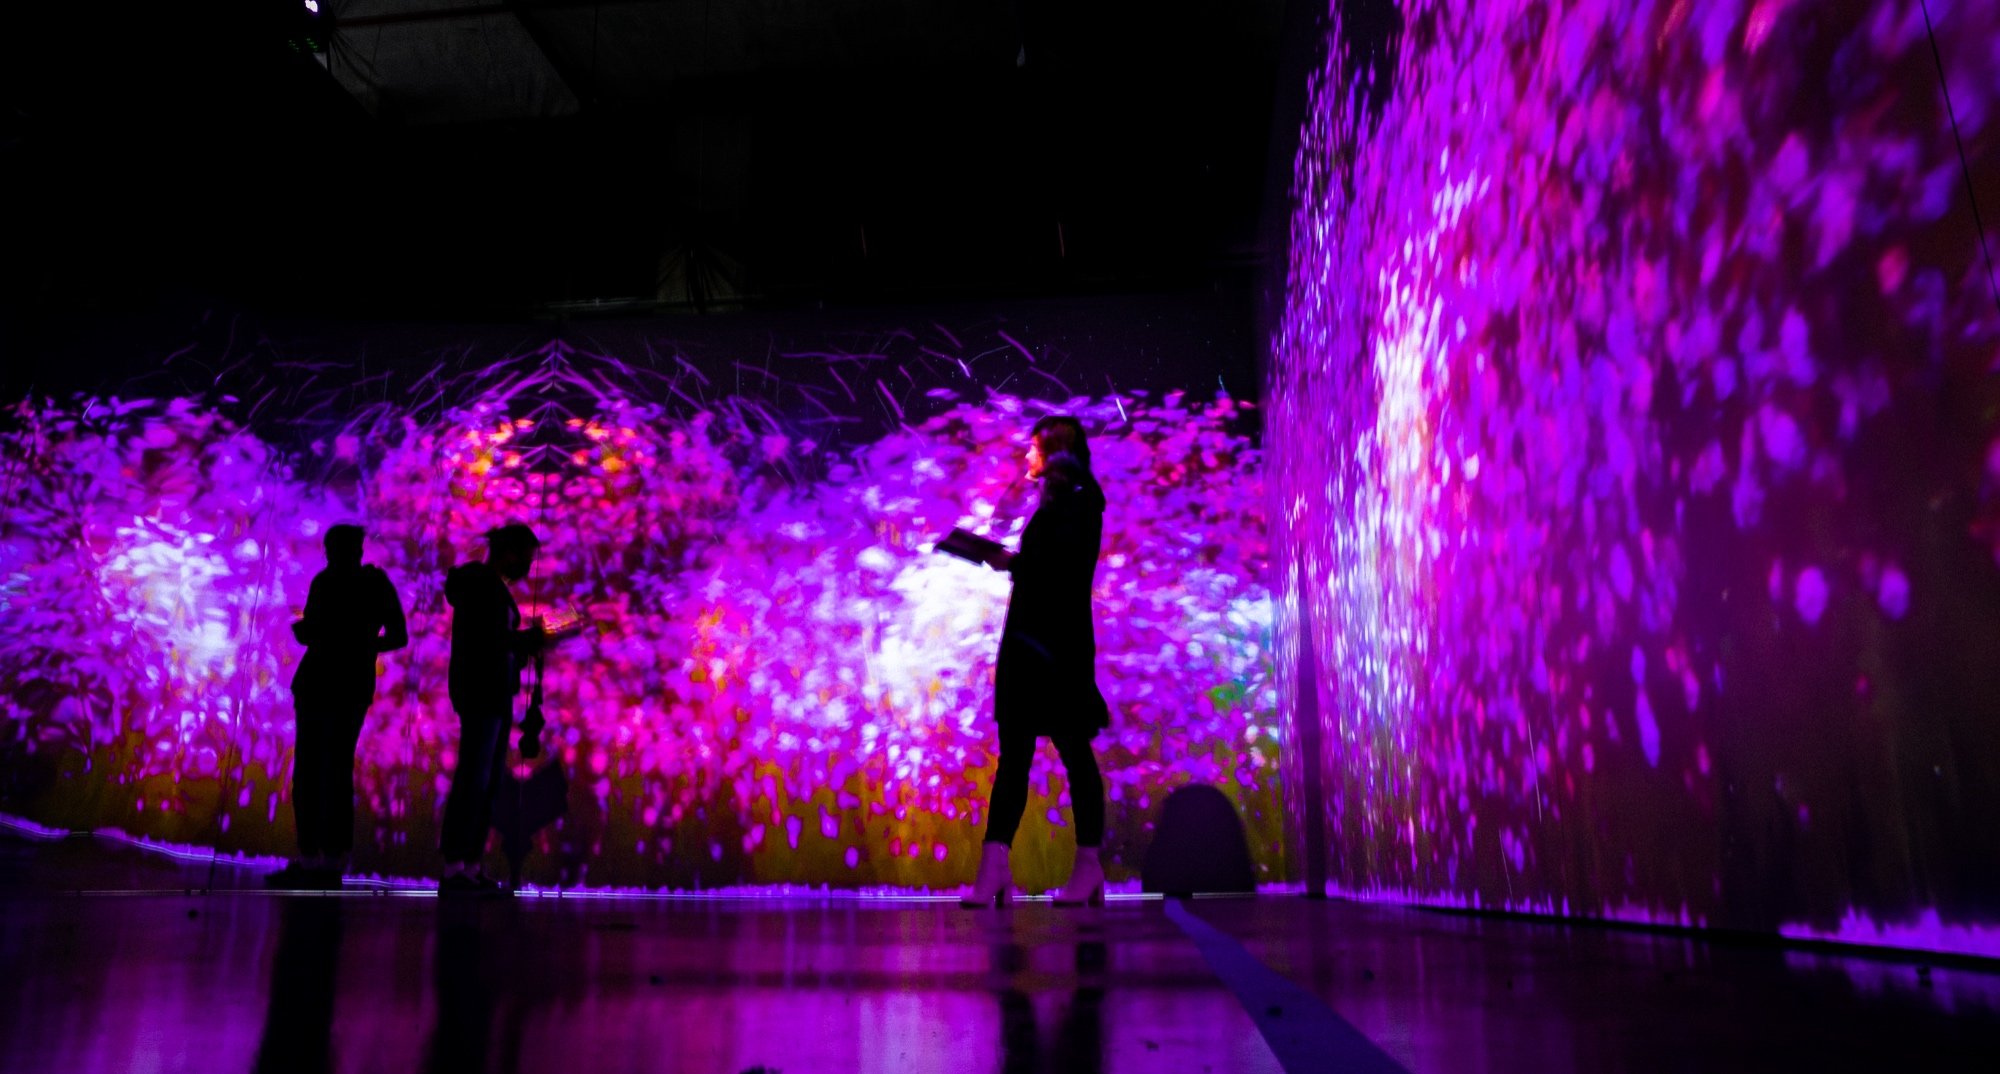 'Korea: Cubically Imagined' Flowers installation by d'strict